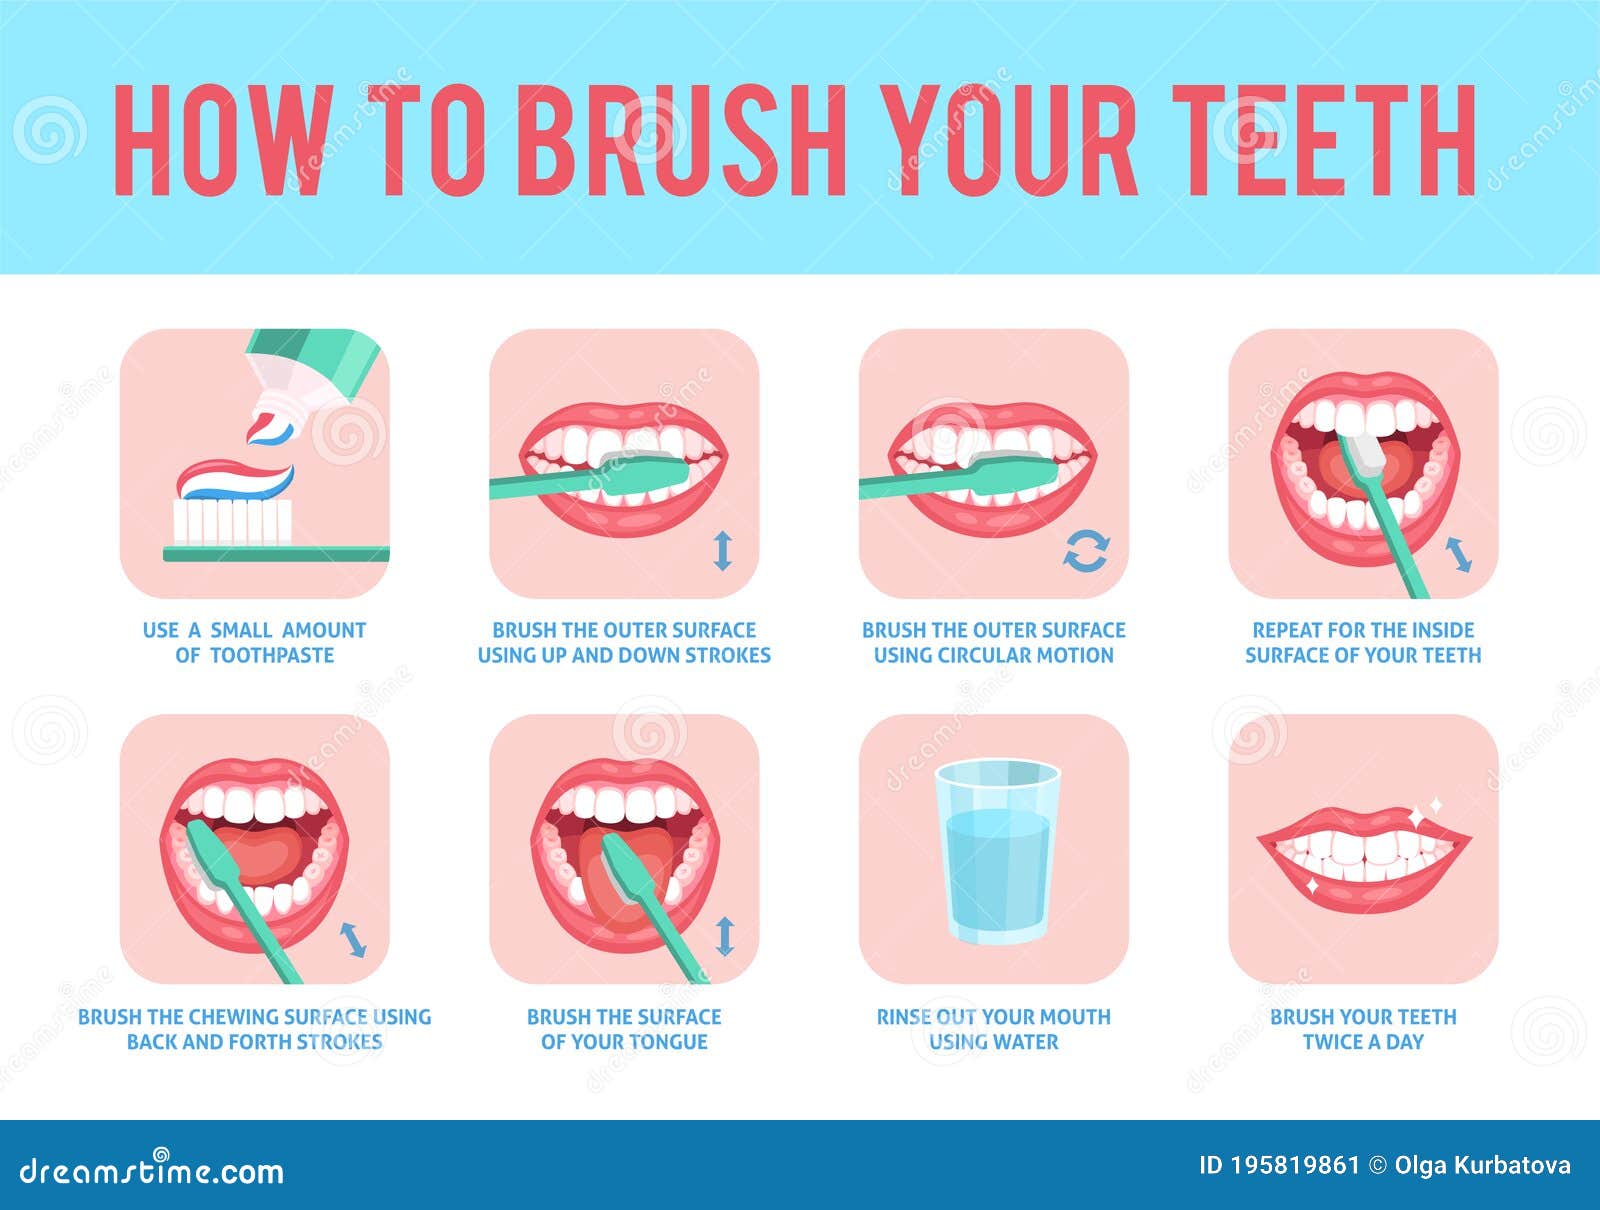 how to brush teeth. correct tooth brushing education instruction, toothbrush and toothpaste for oral hygiene dental care